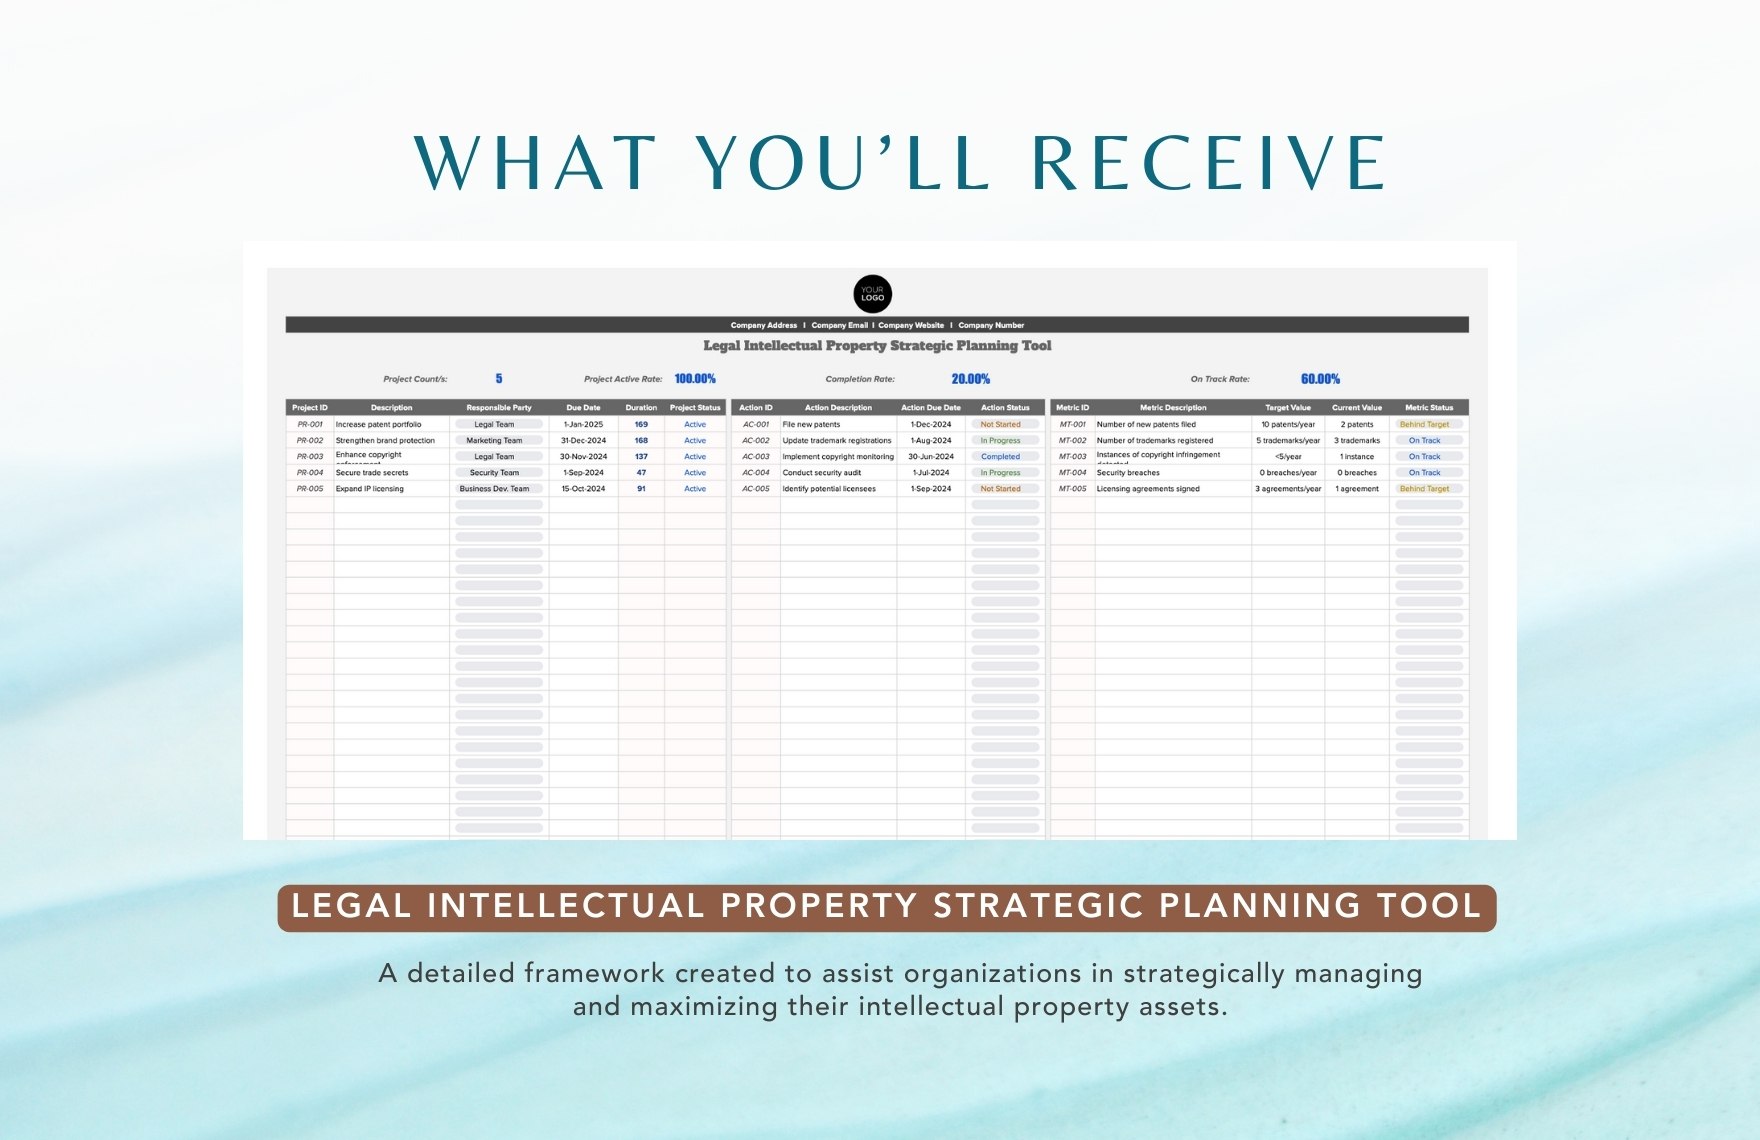 Legal Intellectual Property Strategic Planning Tool Template